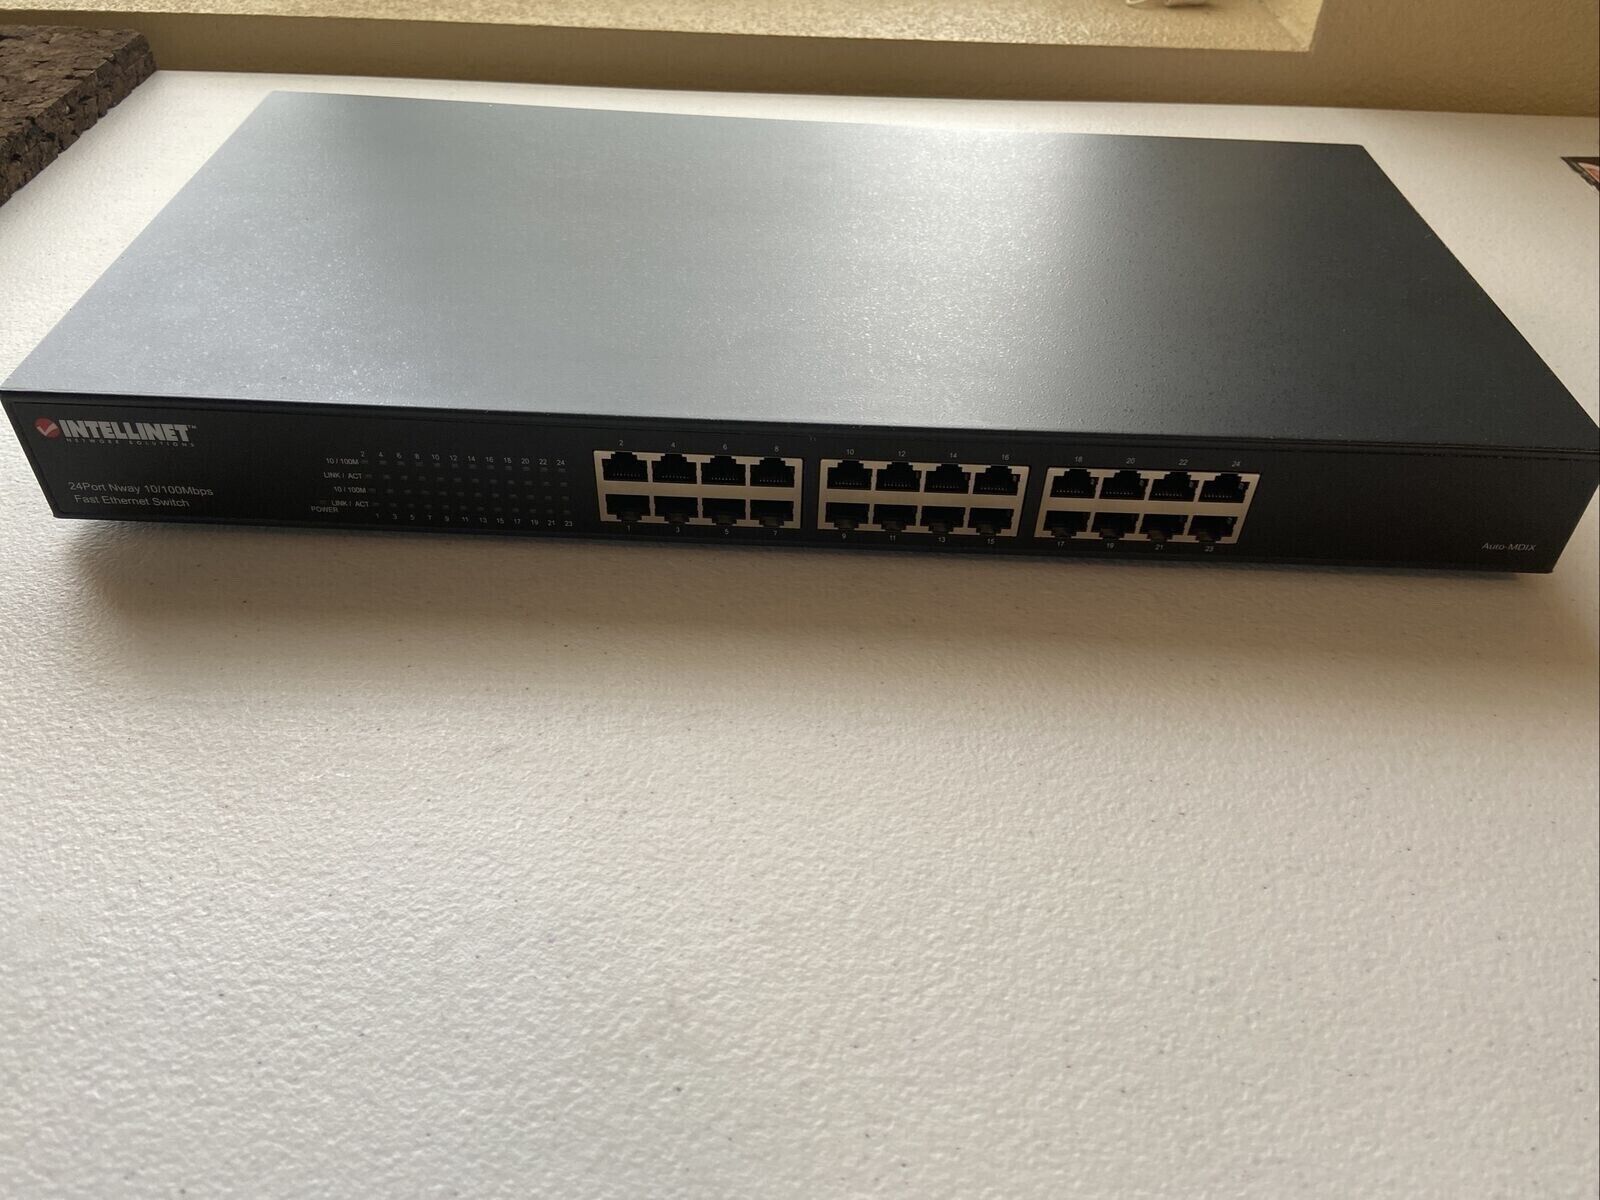 Intellinet 24 port Nway 10/100 Mbps Fast Ethernet Switch Clean Works Perfectly